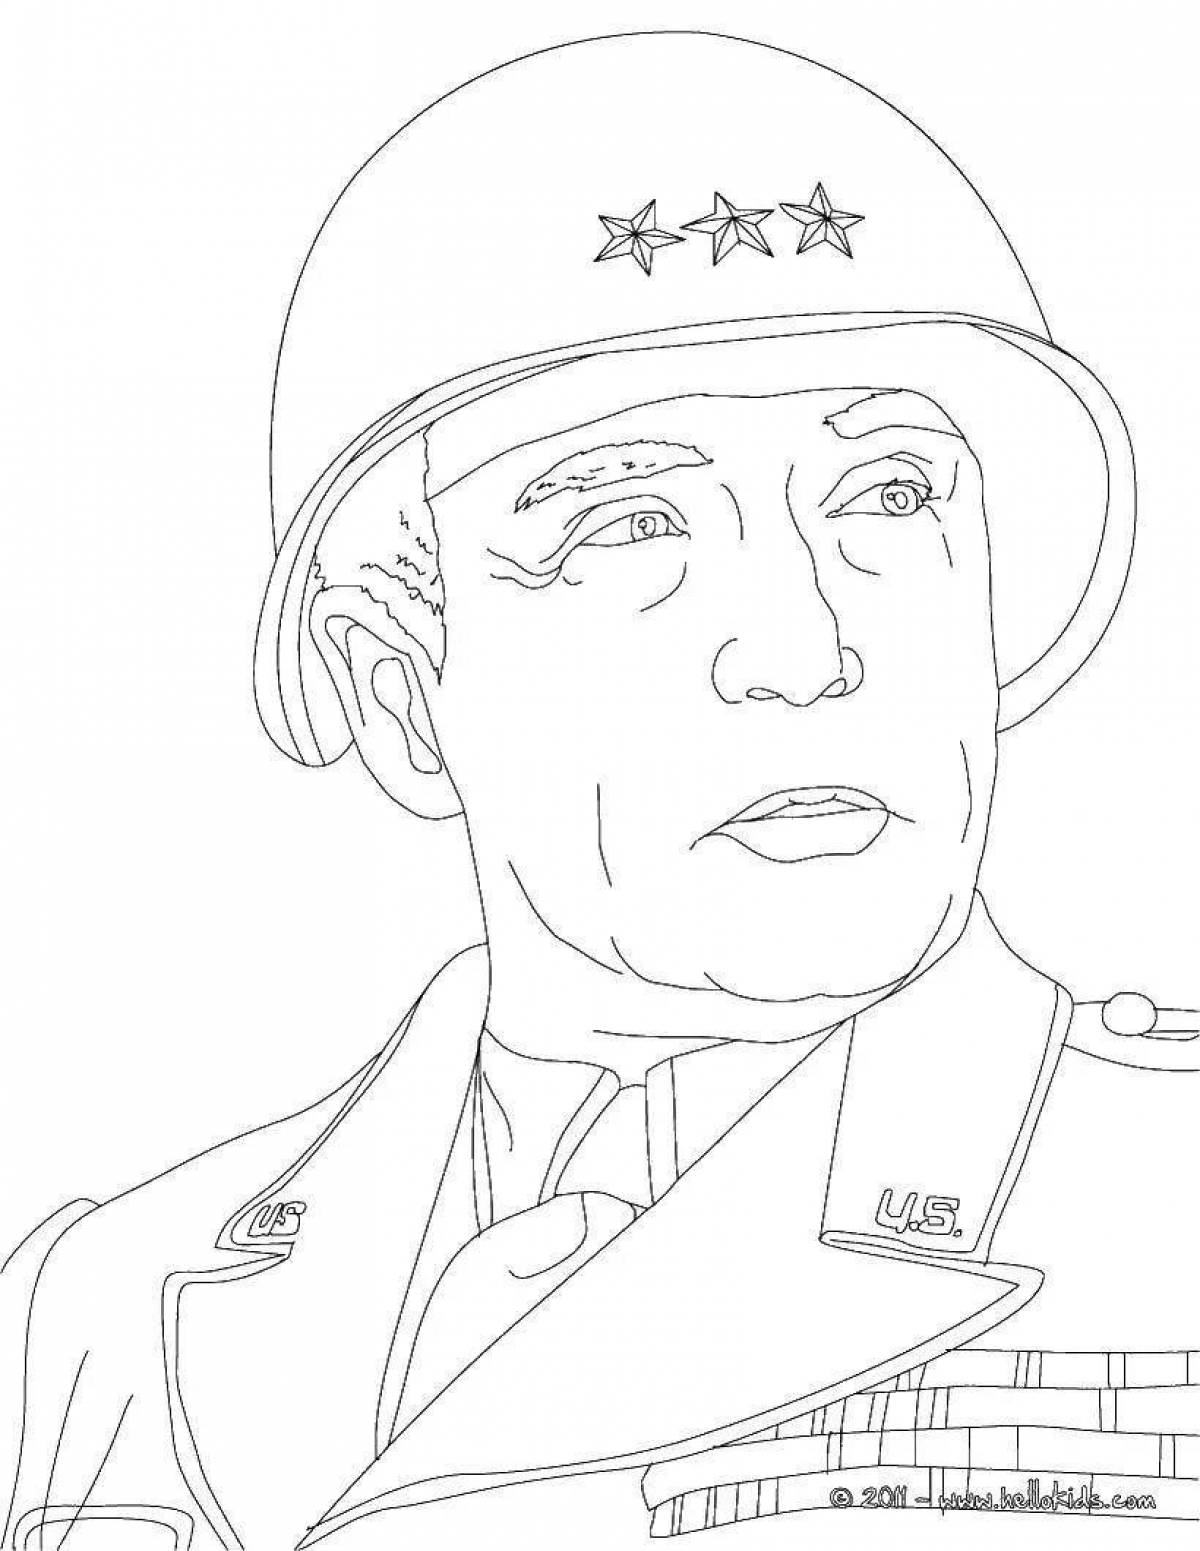 Amazing war face coloring page